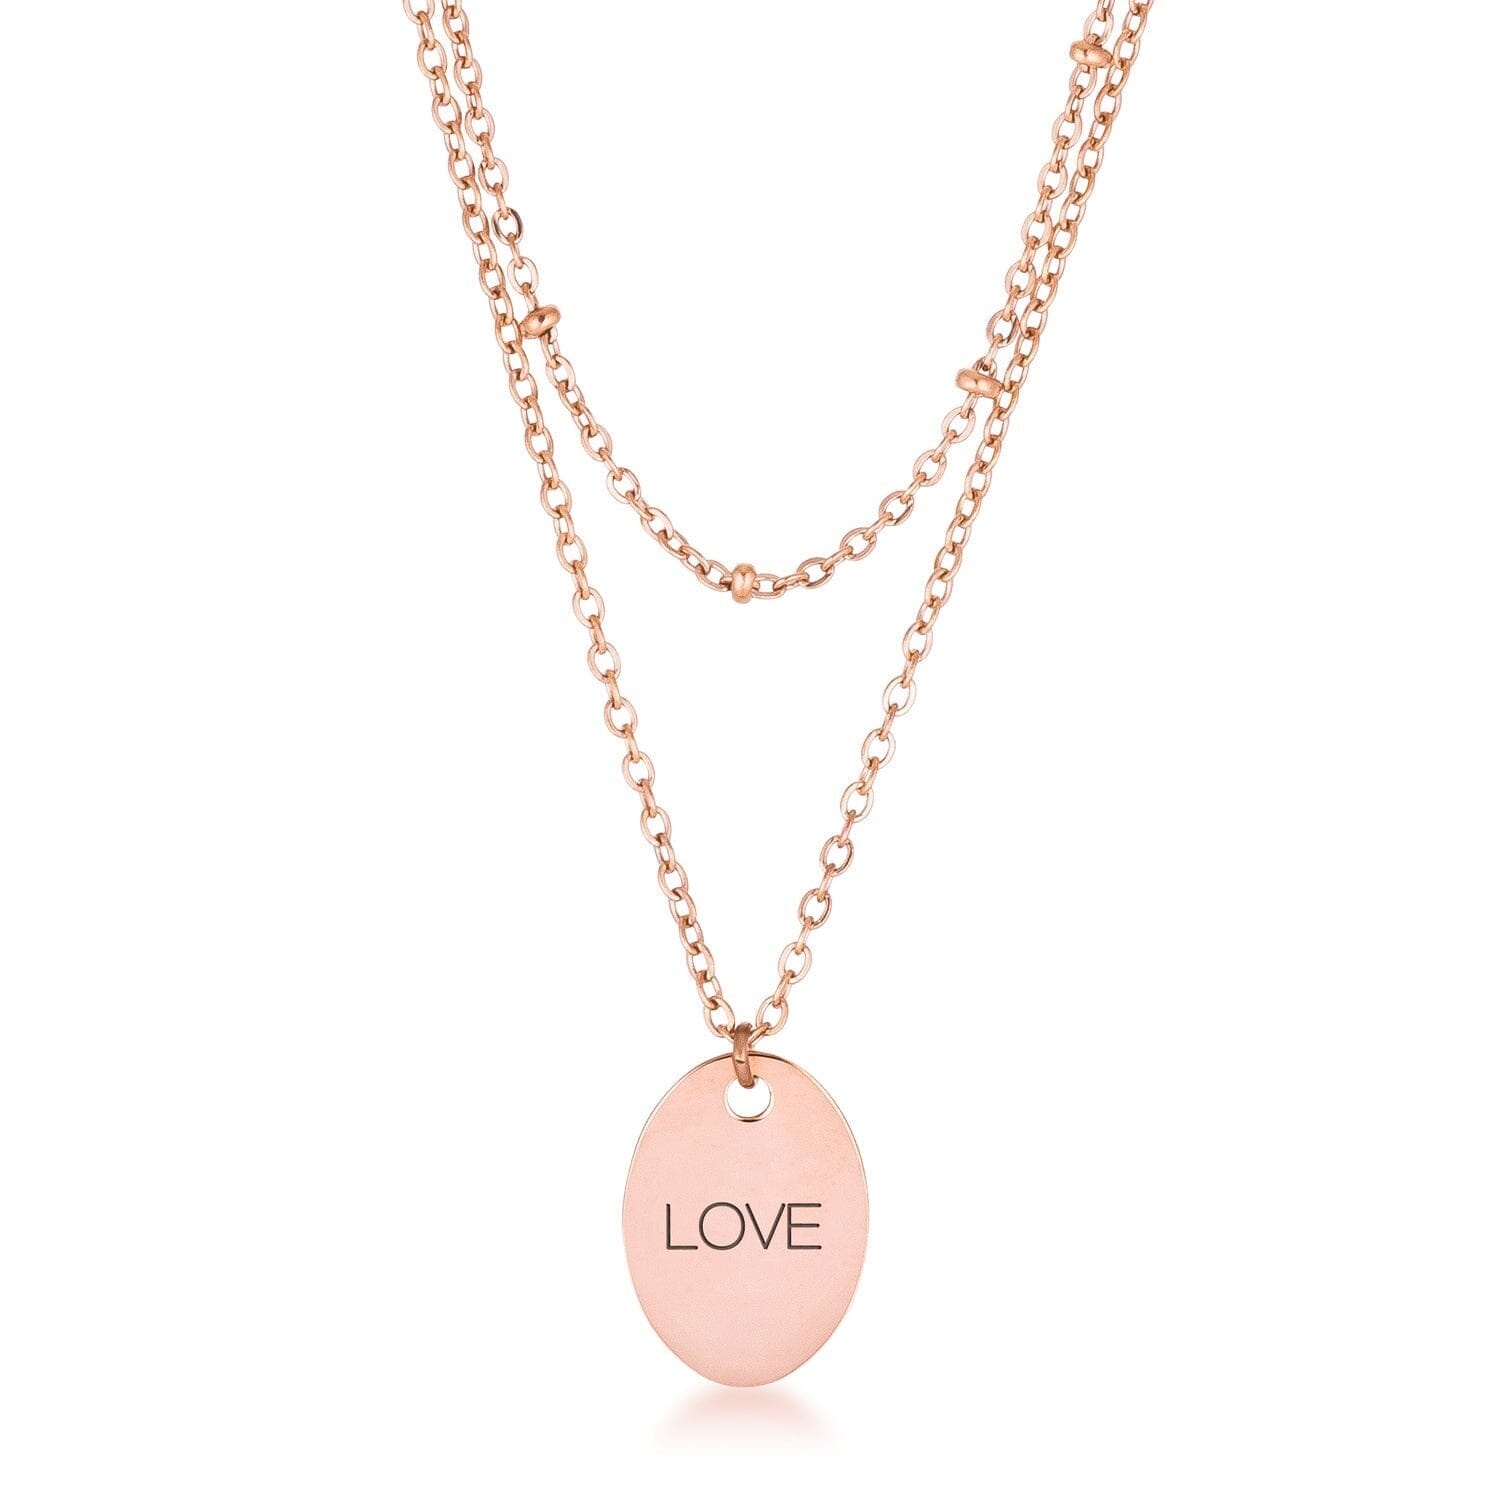 Rose Gold Plated Double Chain LOVE Necklace Necklaces Das Juwel 